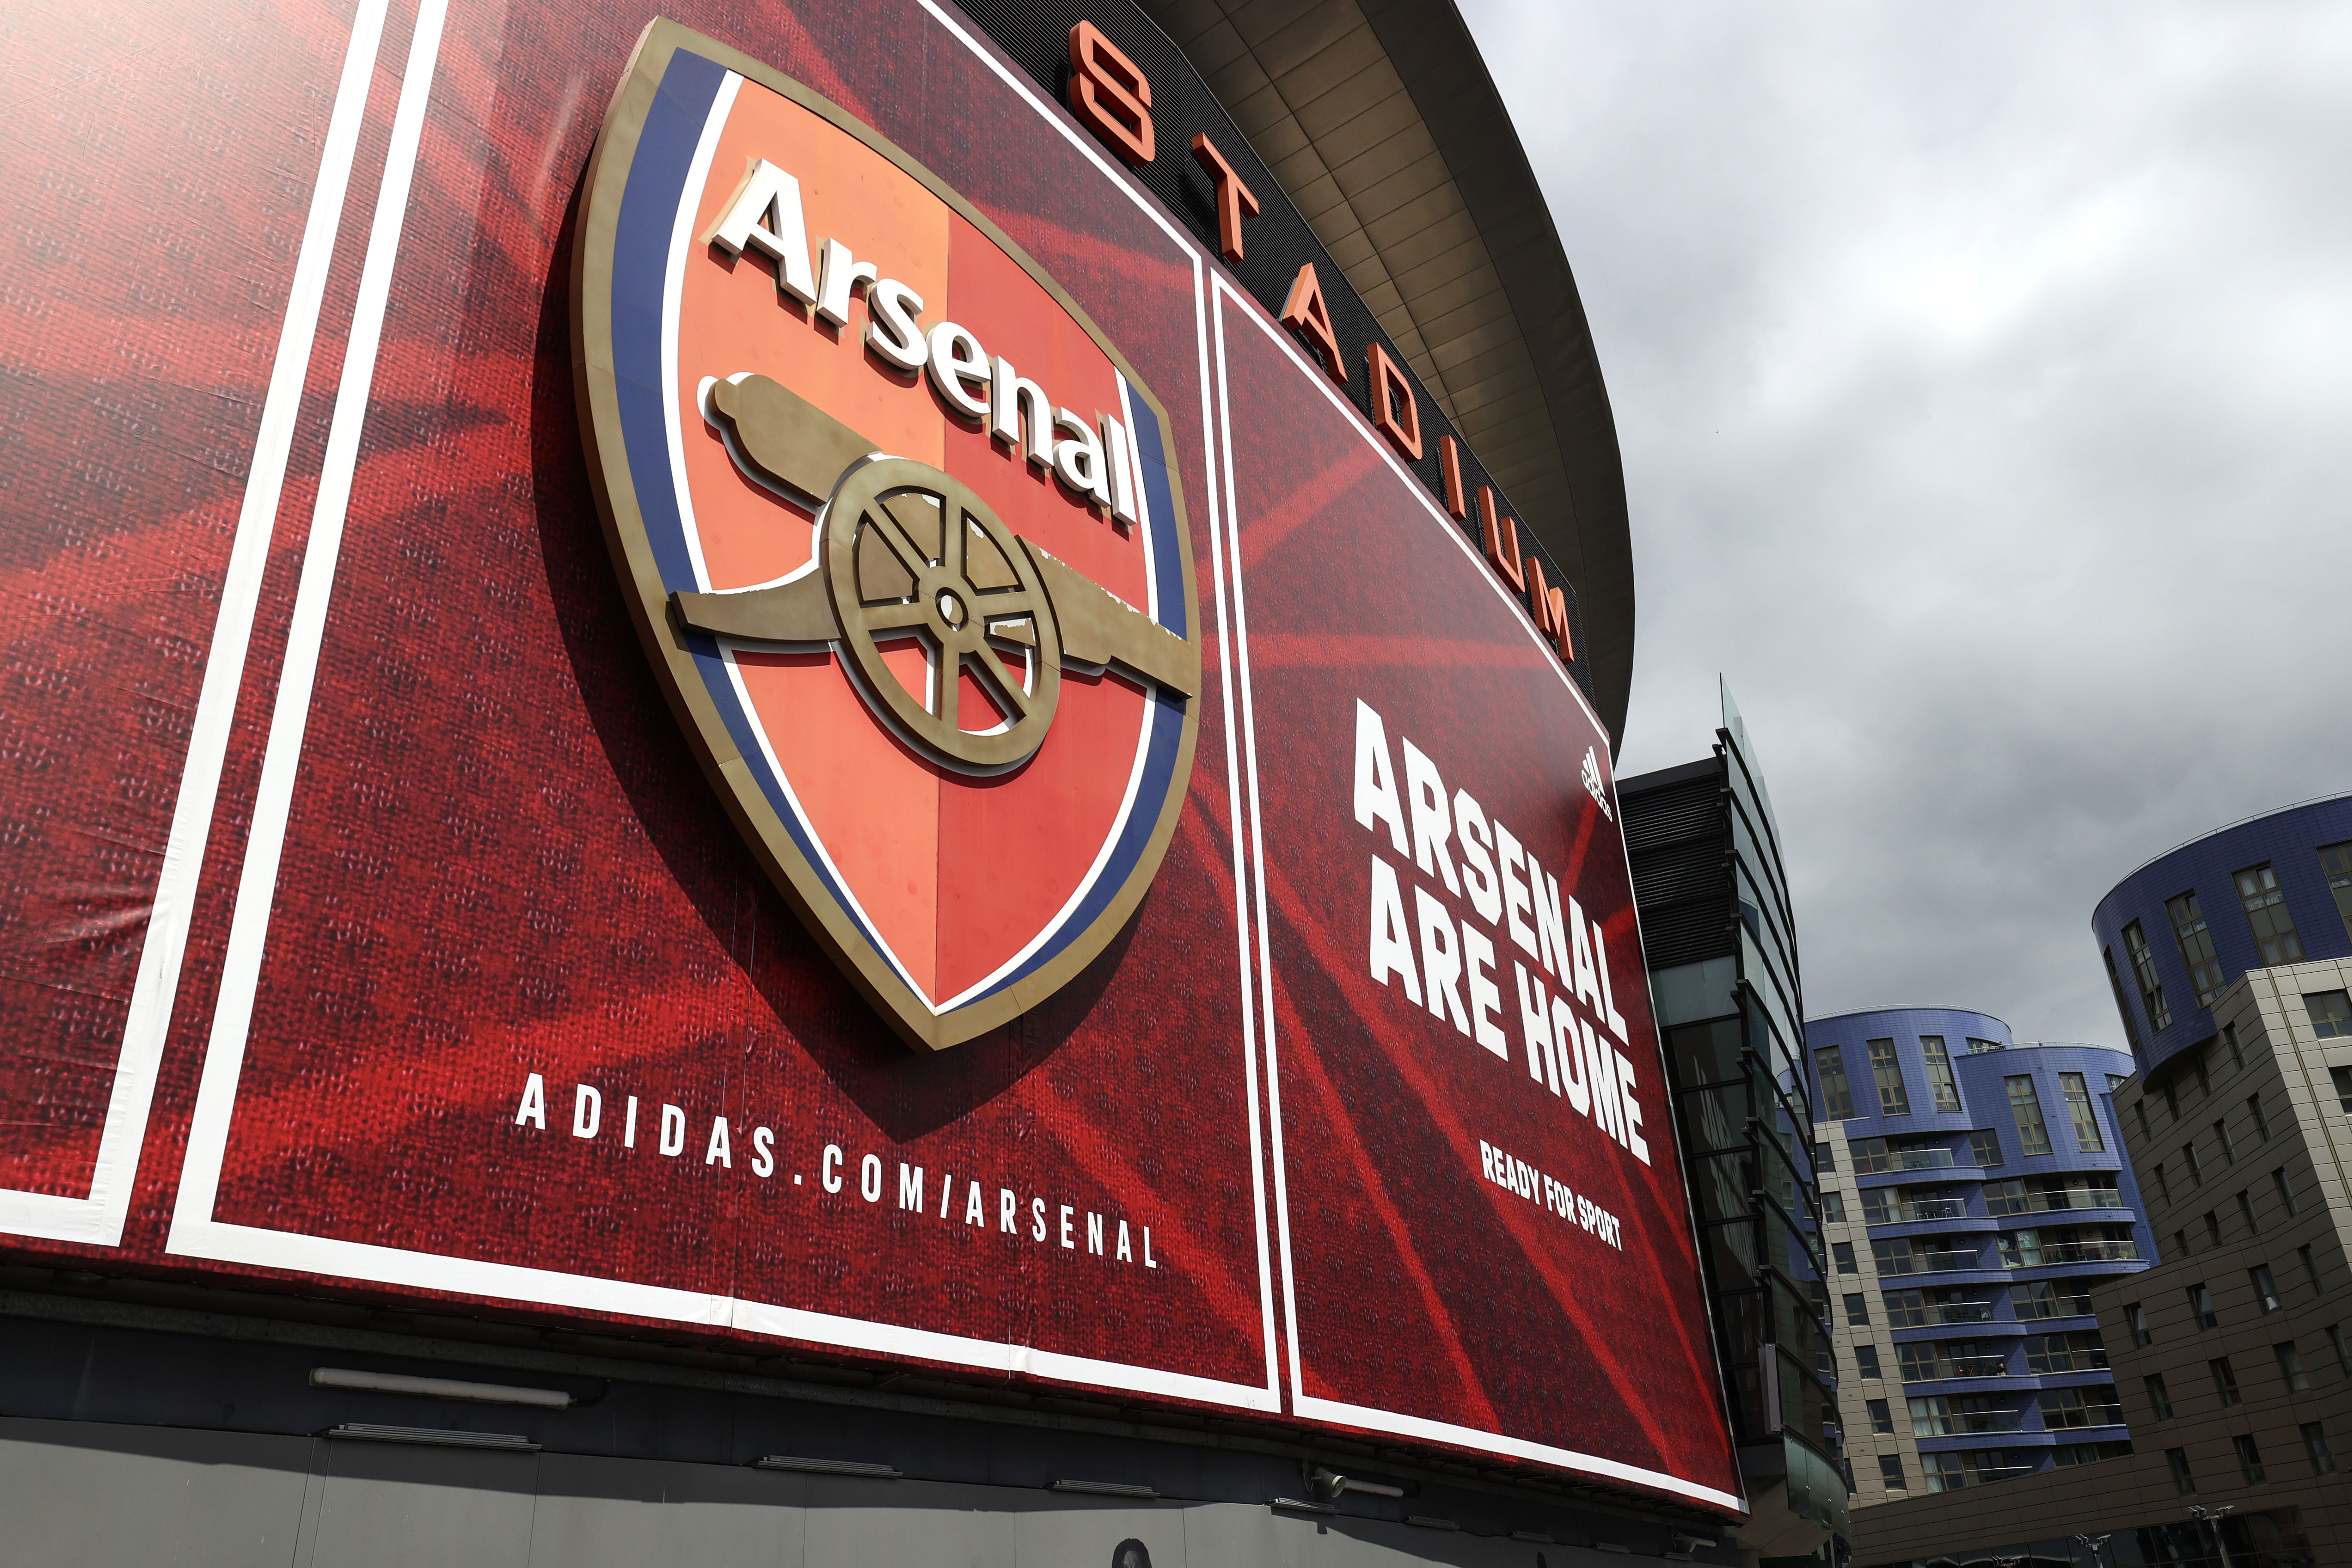 Arsenal reach 300 victories at The Emirates after Forest beaten 5-0